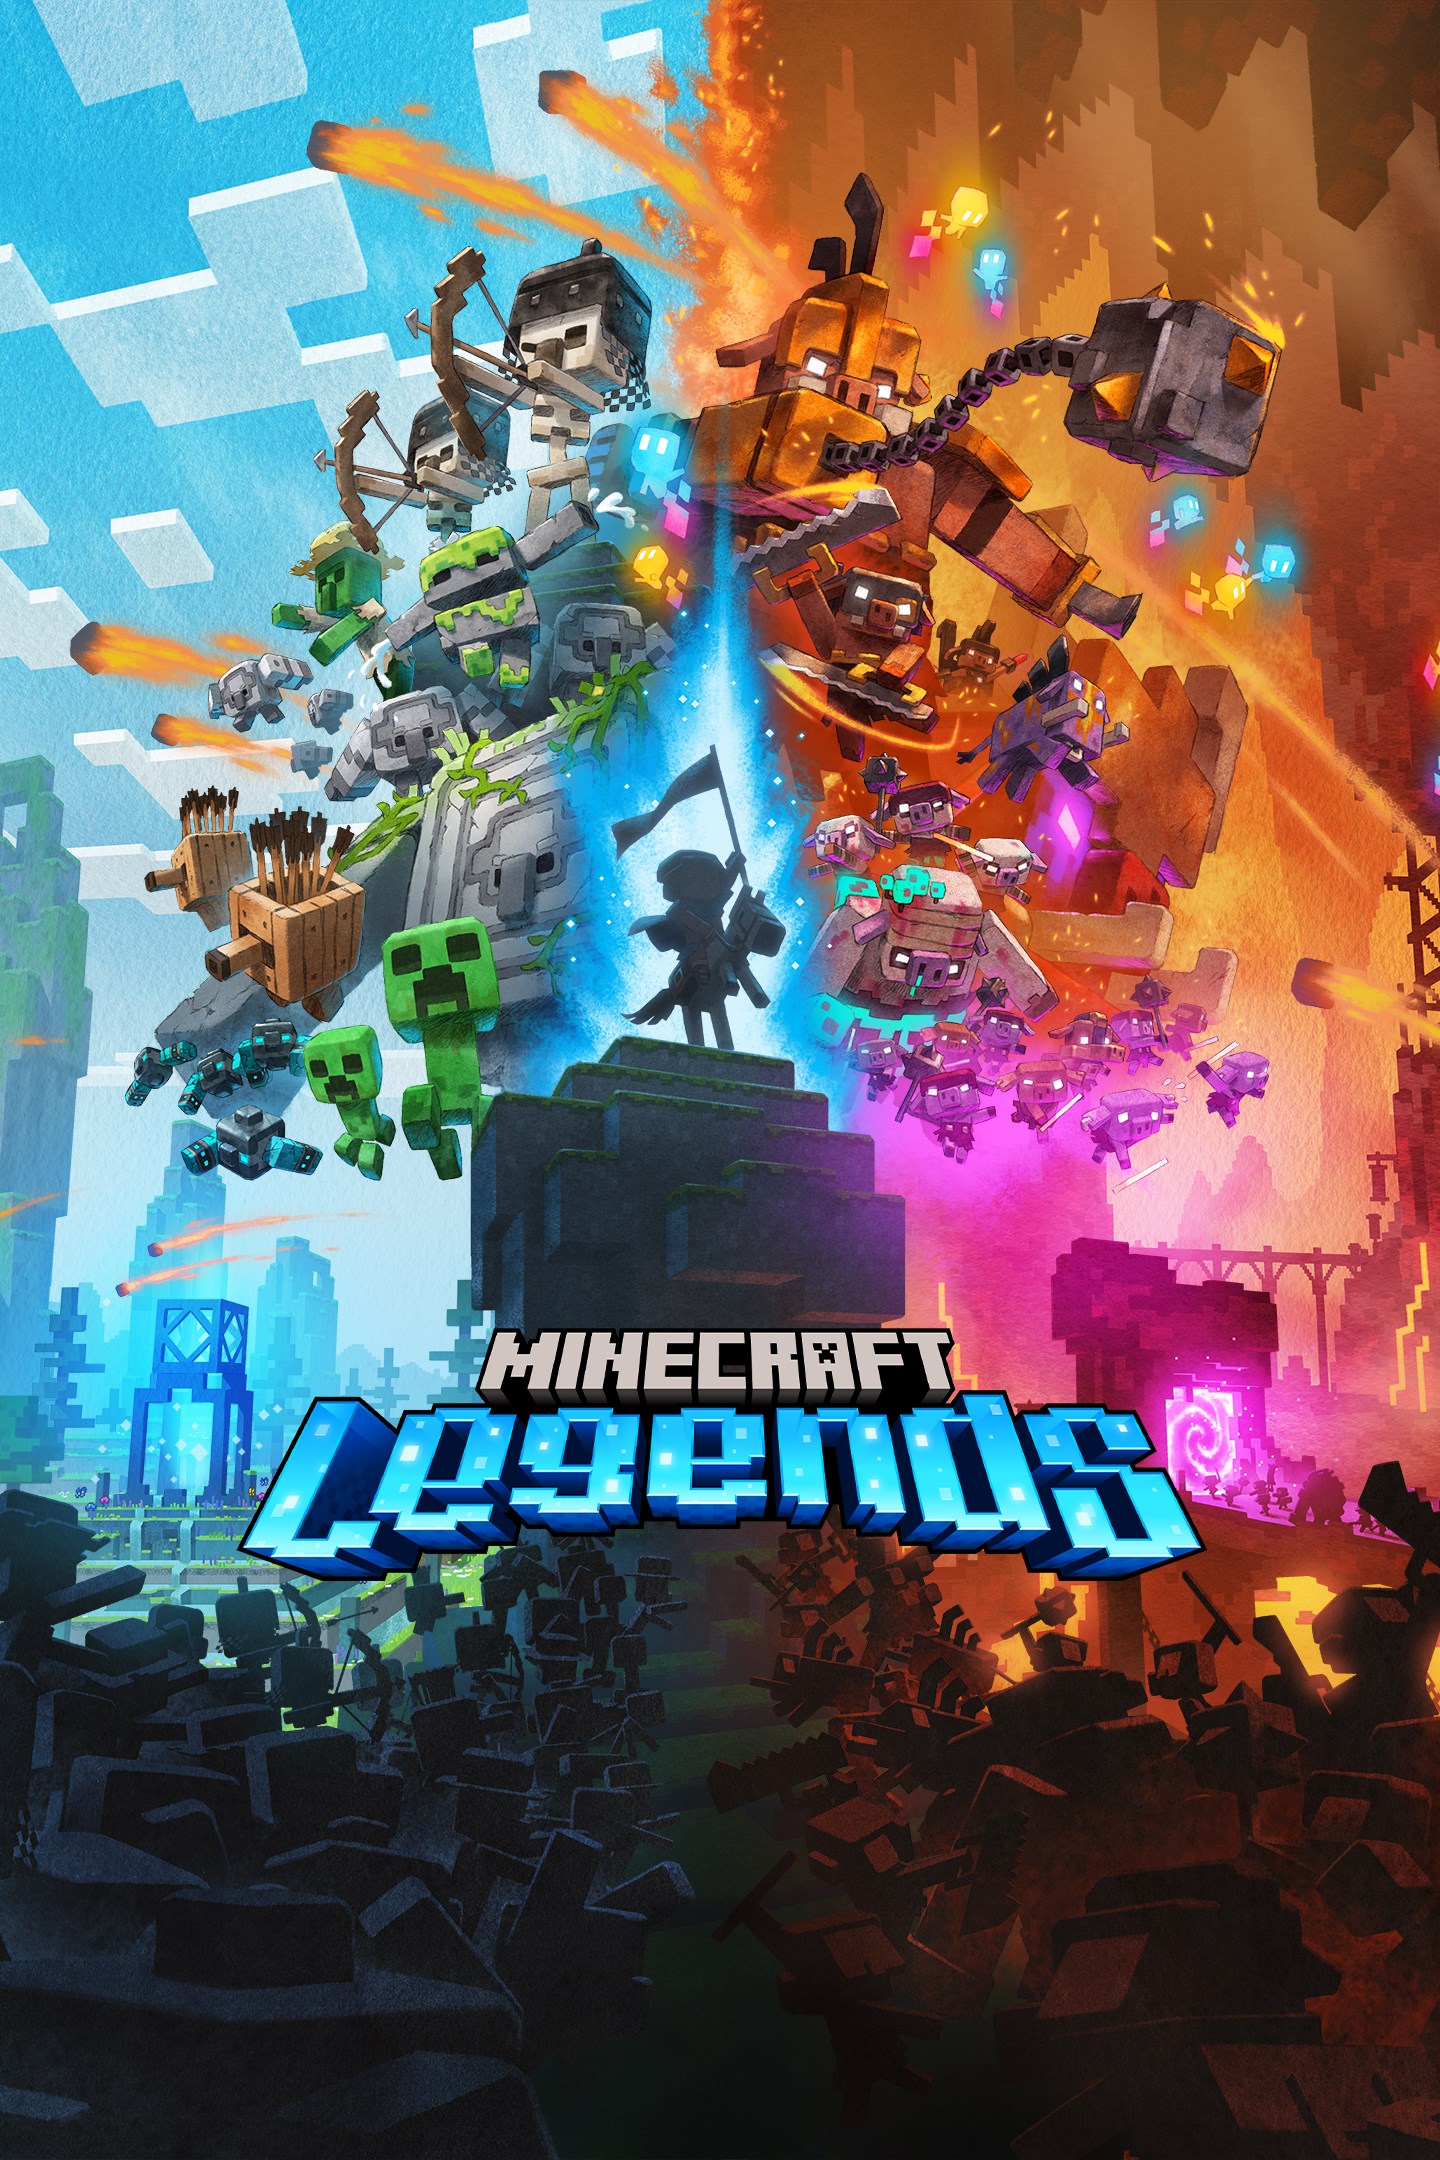 Play Minecraft Legends  Xbox Cloud Gaming (Beta) on